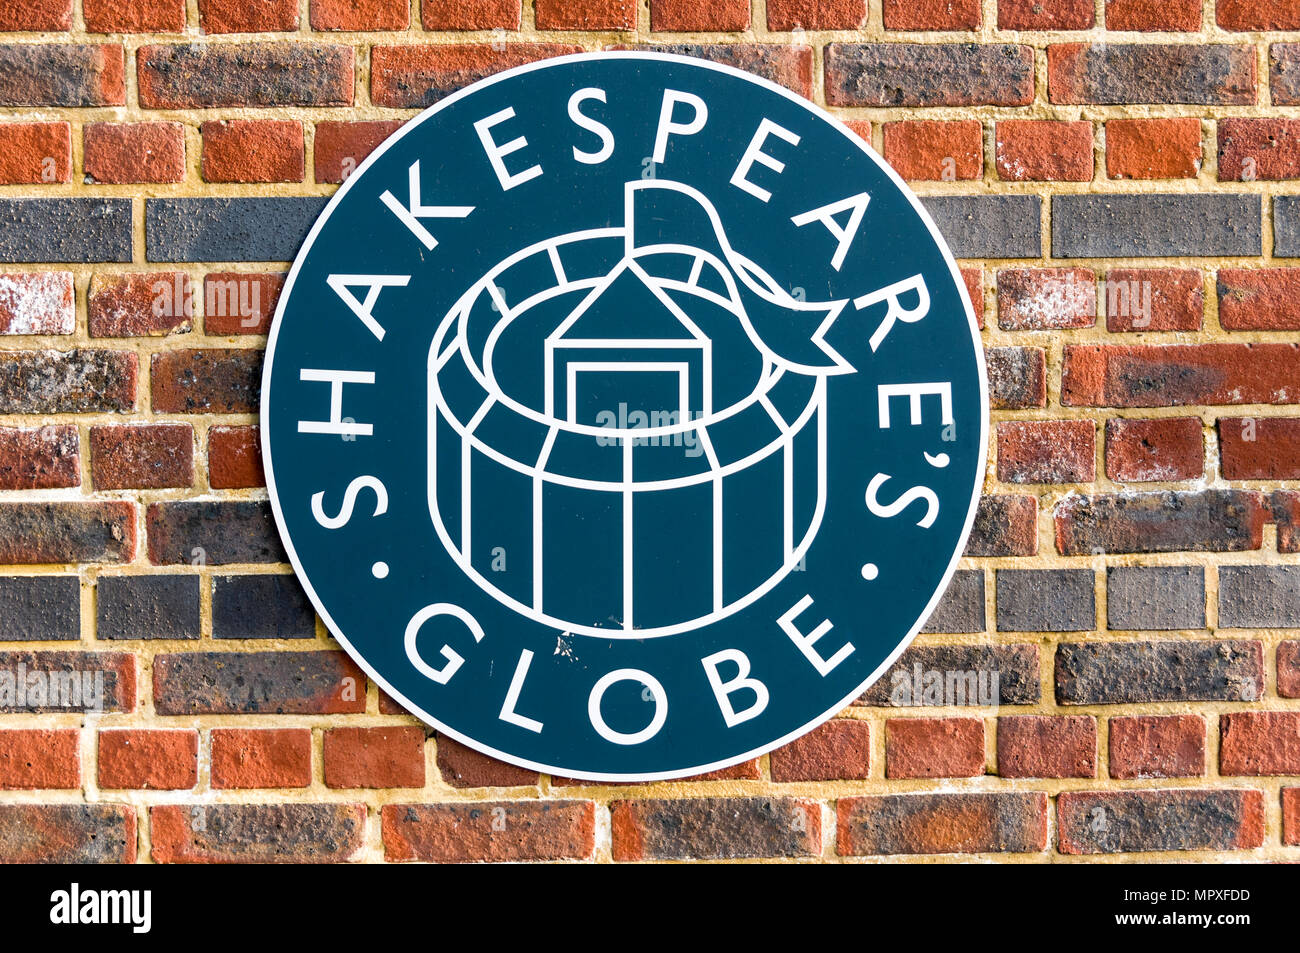 Plaque of Shakespeare's Globe theatre on the South Bank of the River Thames, London Stock Photo